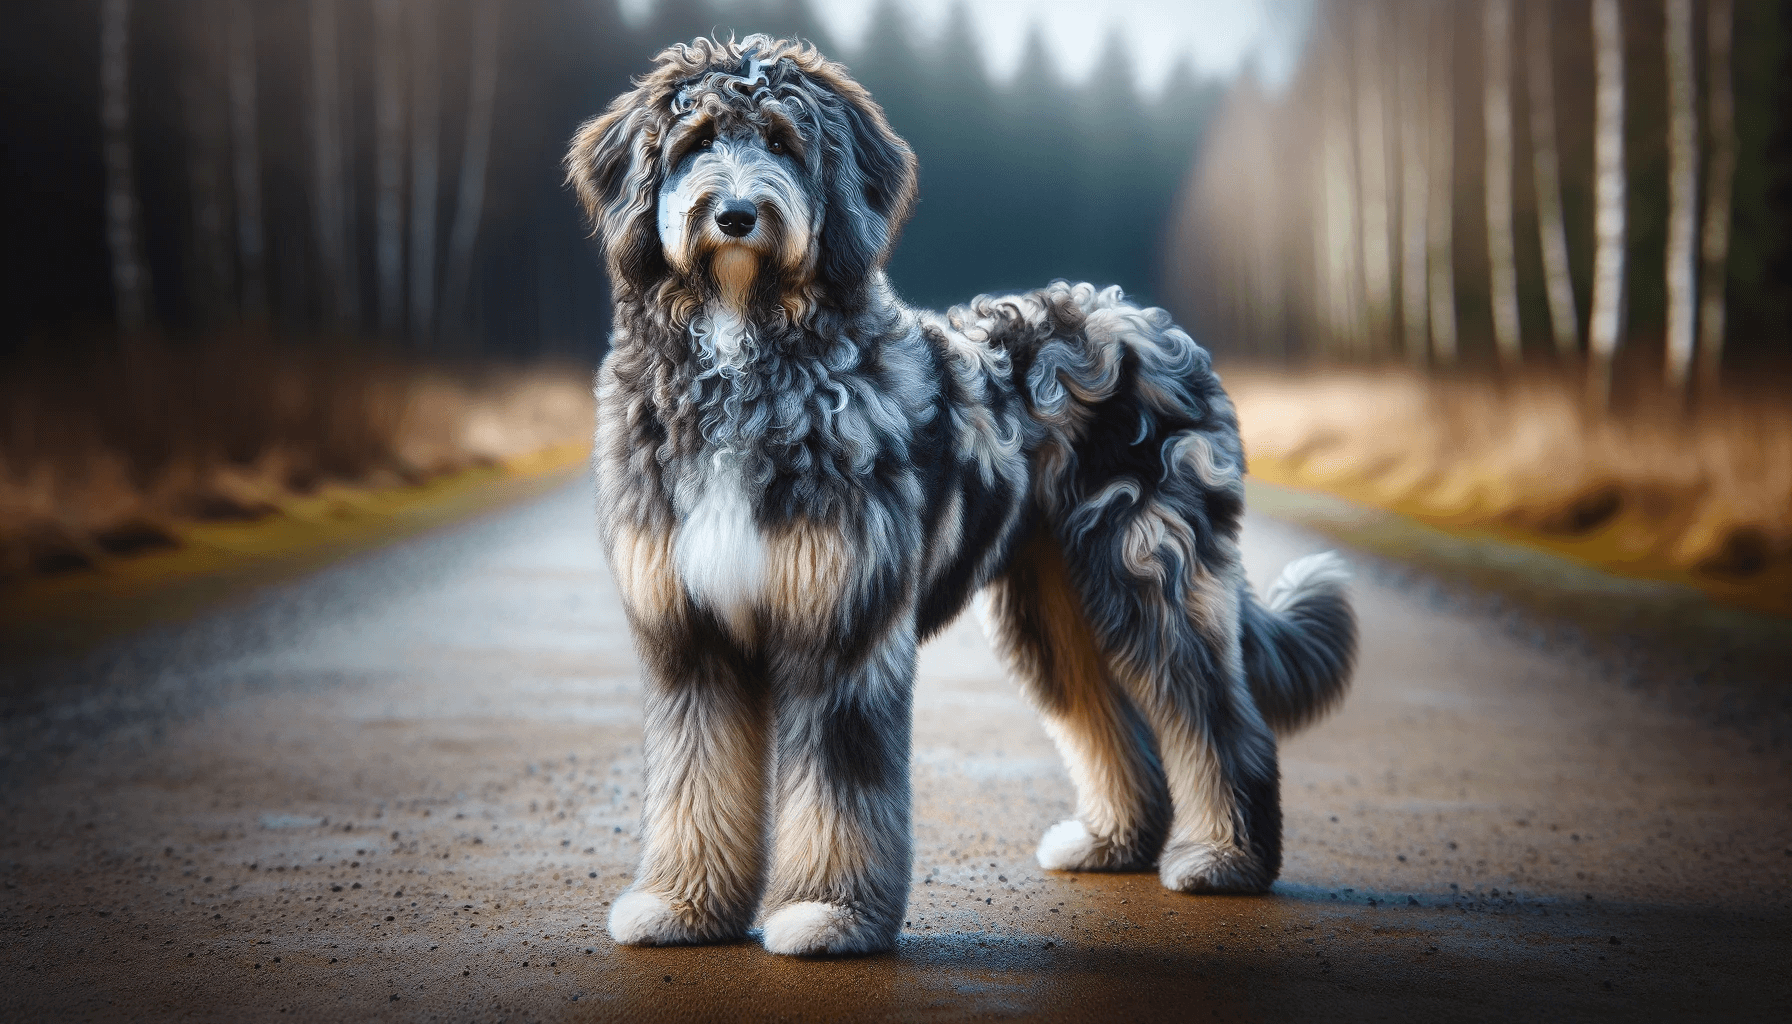 Merle Aussiedoodle standing confidently on a path, its distinctive merle coat patterns and attentive stance conveying the breed's alertness.